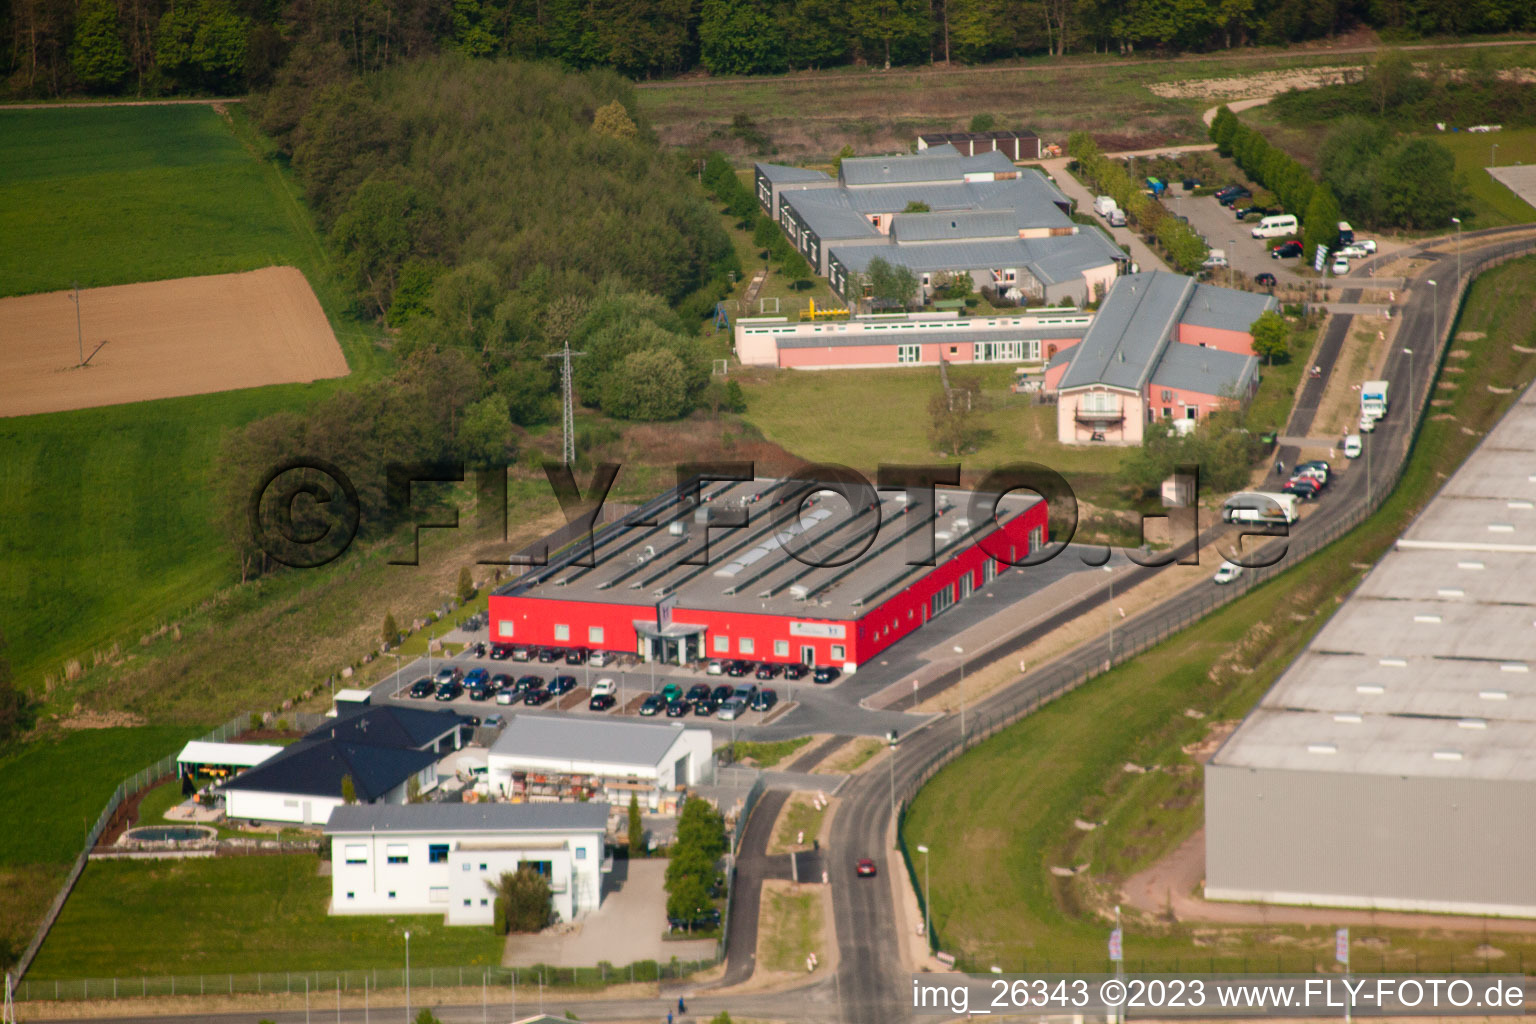 Aerial photograpy of Bienwald-Fitnessworld in the Horst industrial area in the district Minderslachen in Kandel in the state Rhineland-Palatinate, Germany